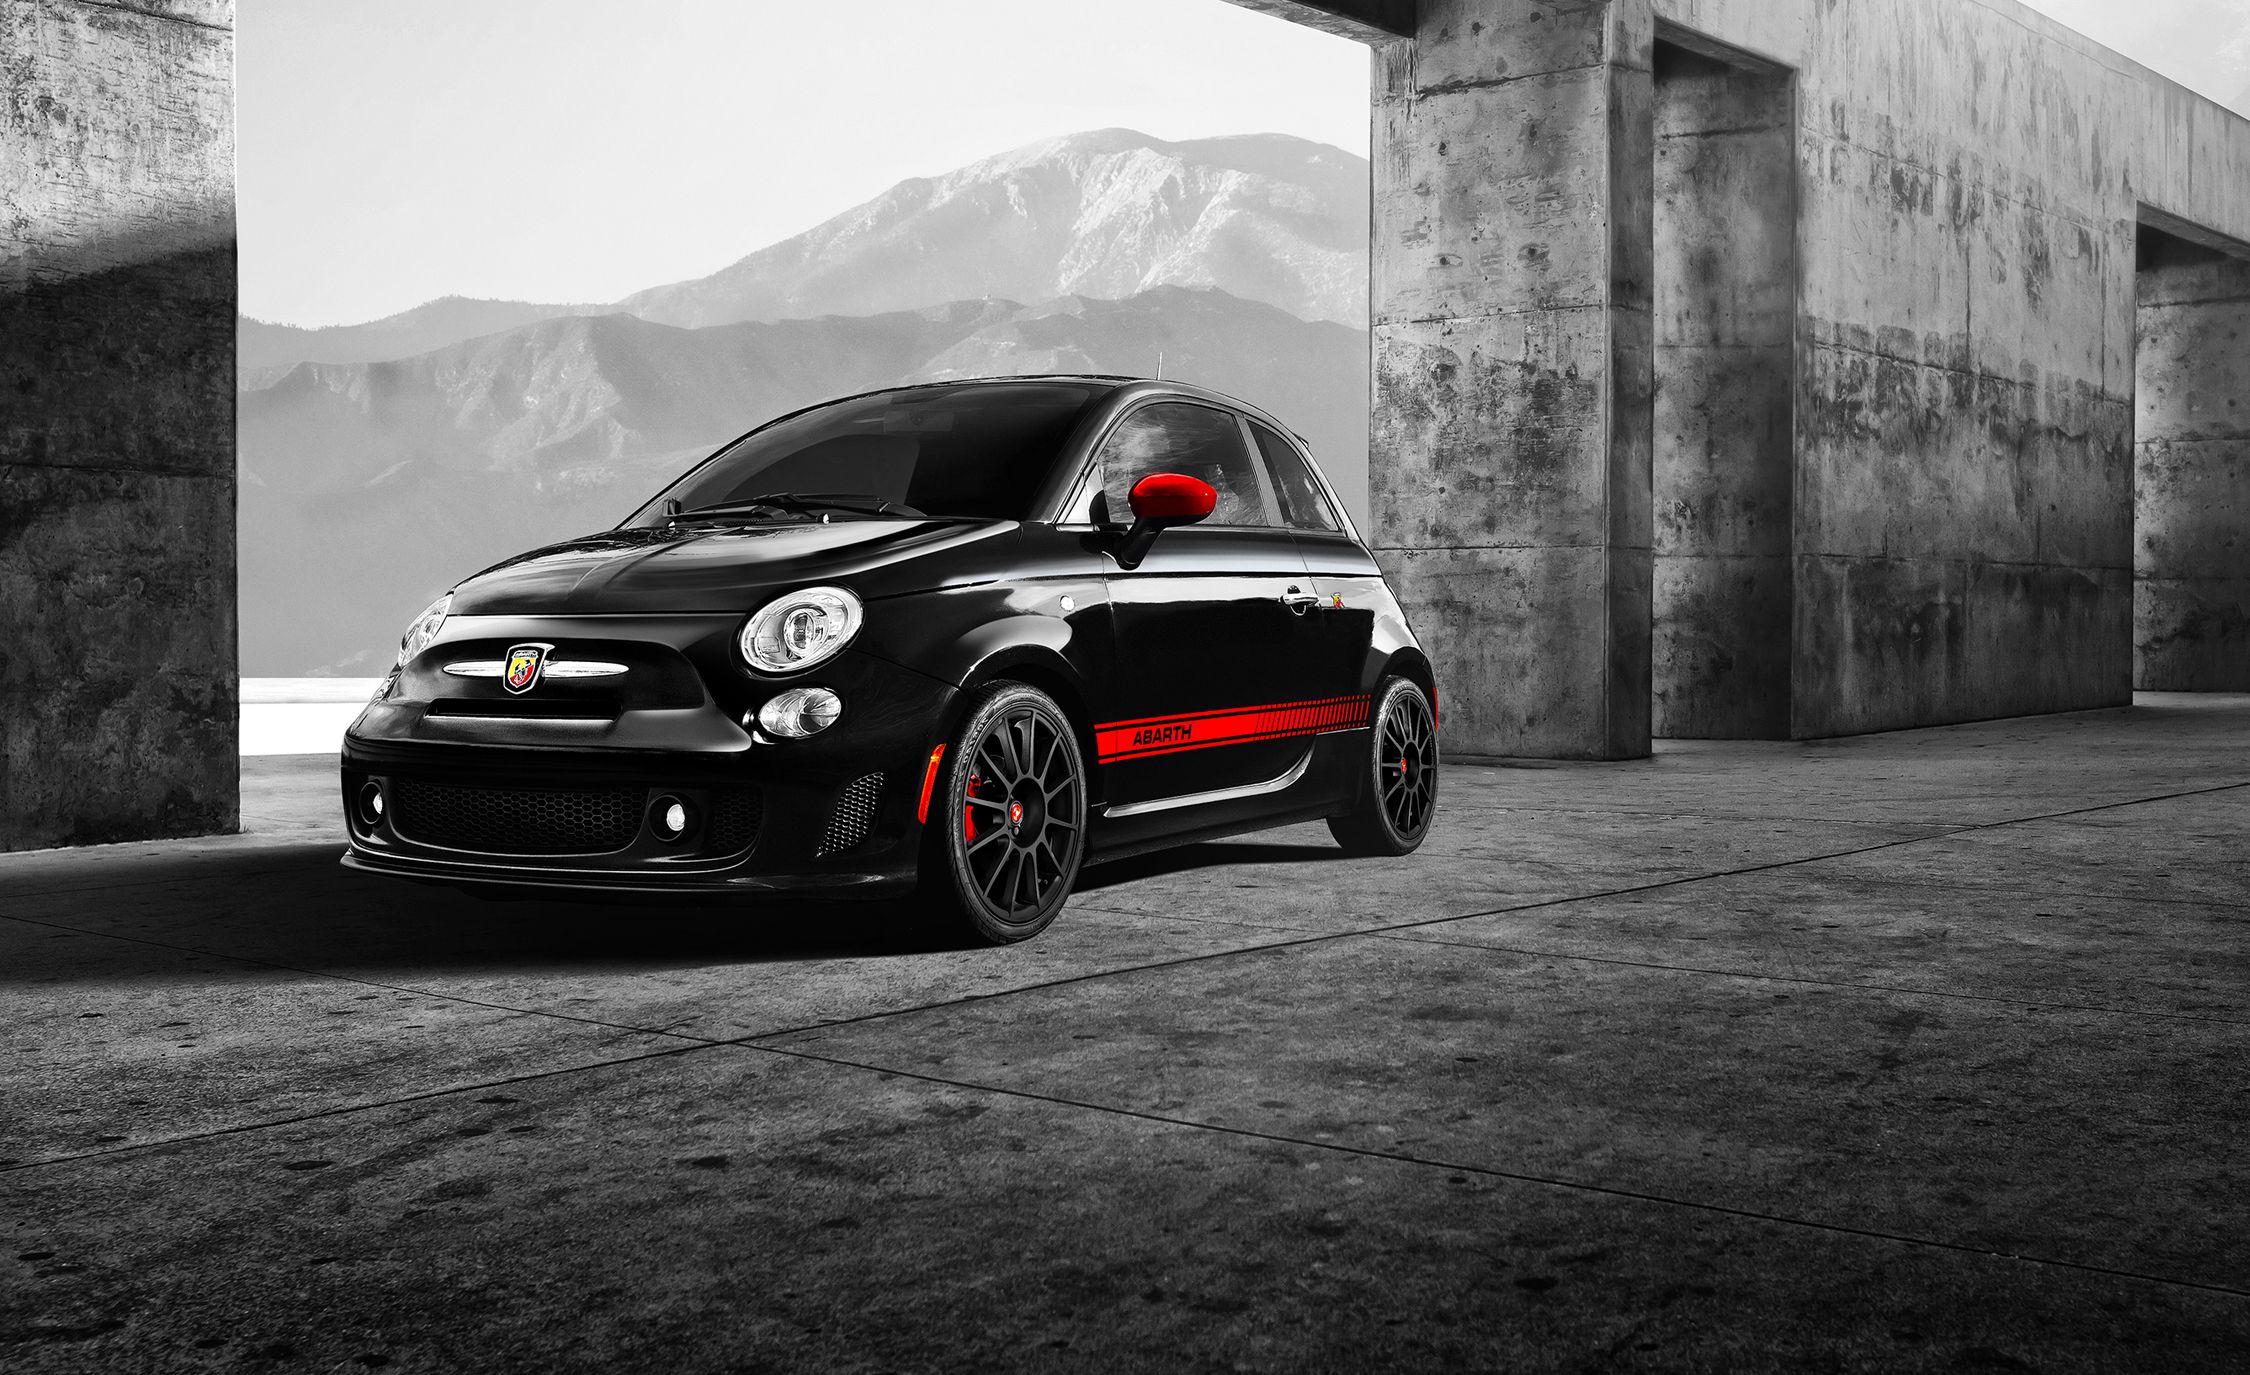 Fiat 500 C is convertible version of the Fiat 500 city car with